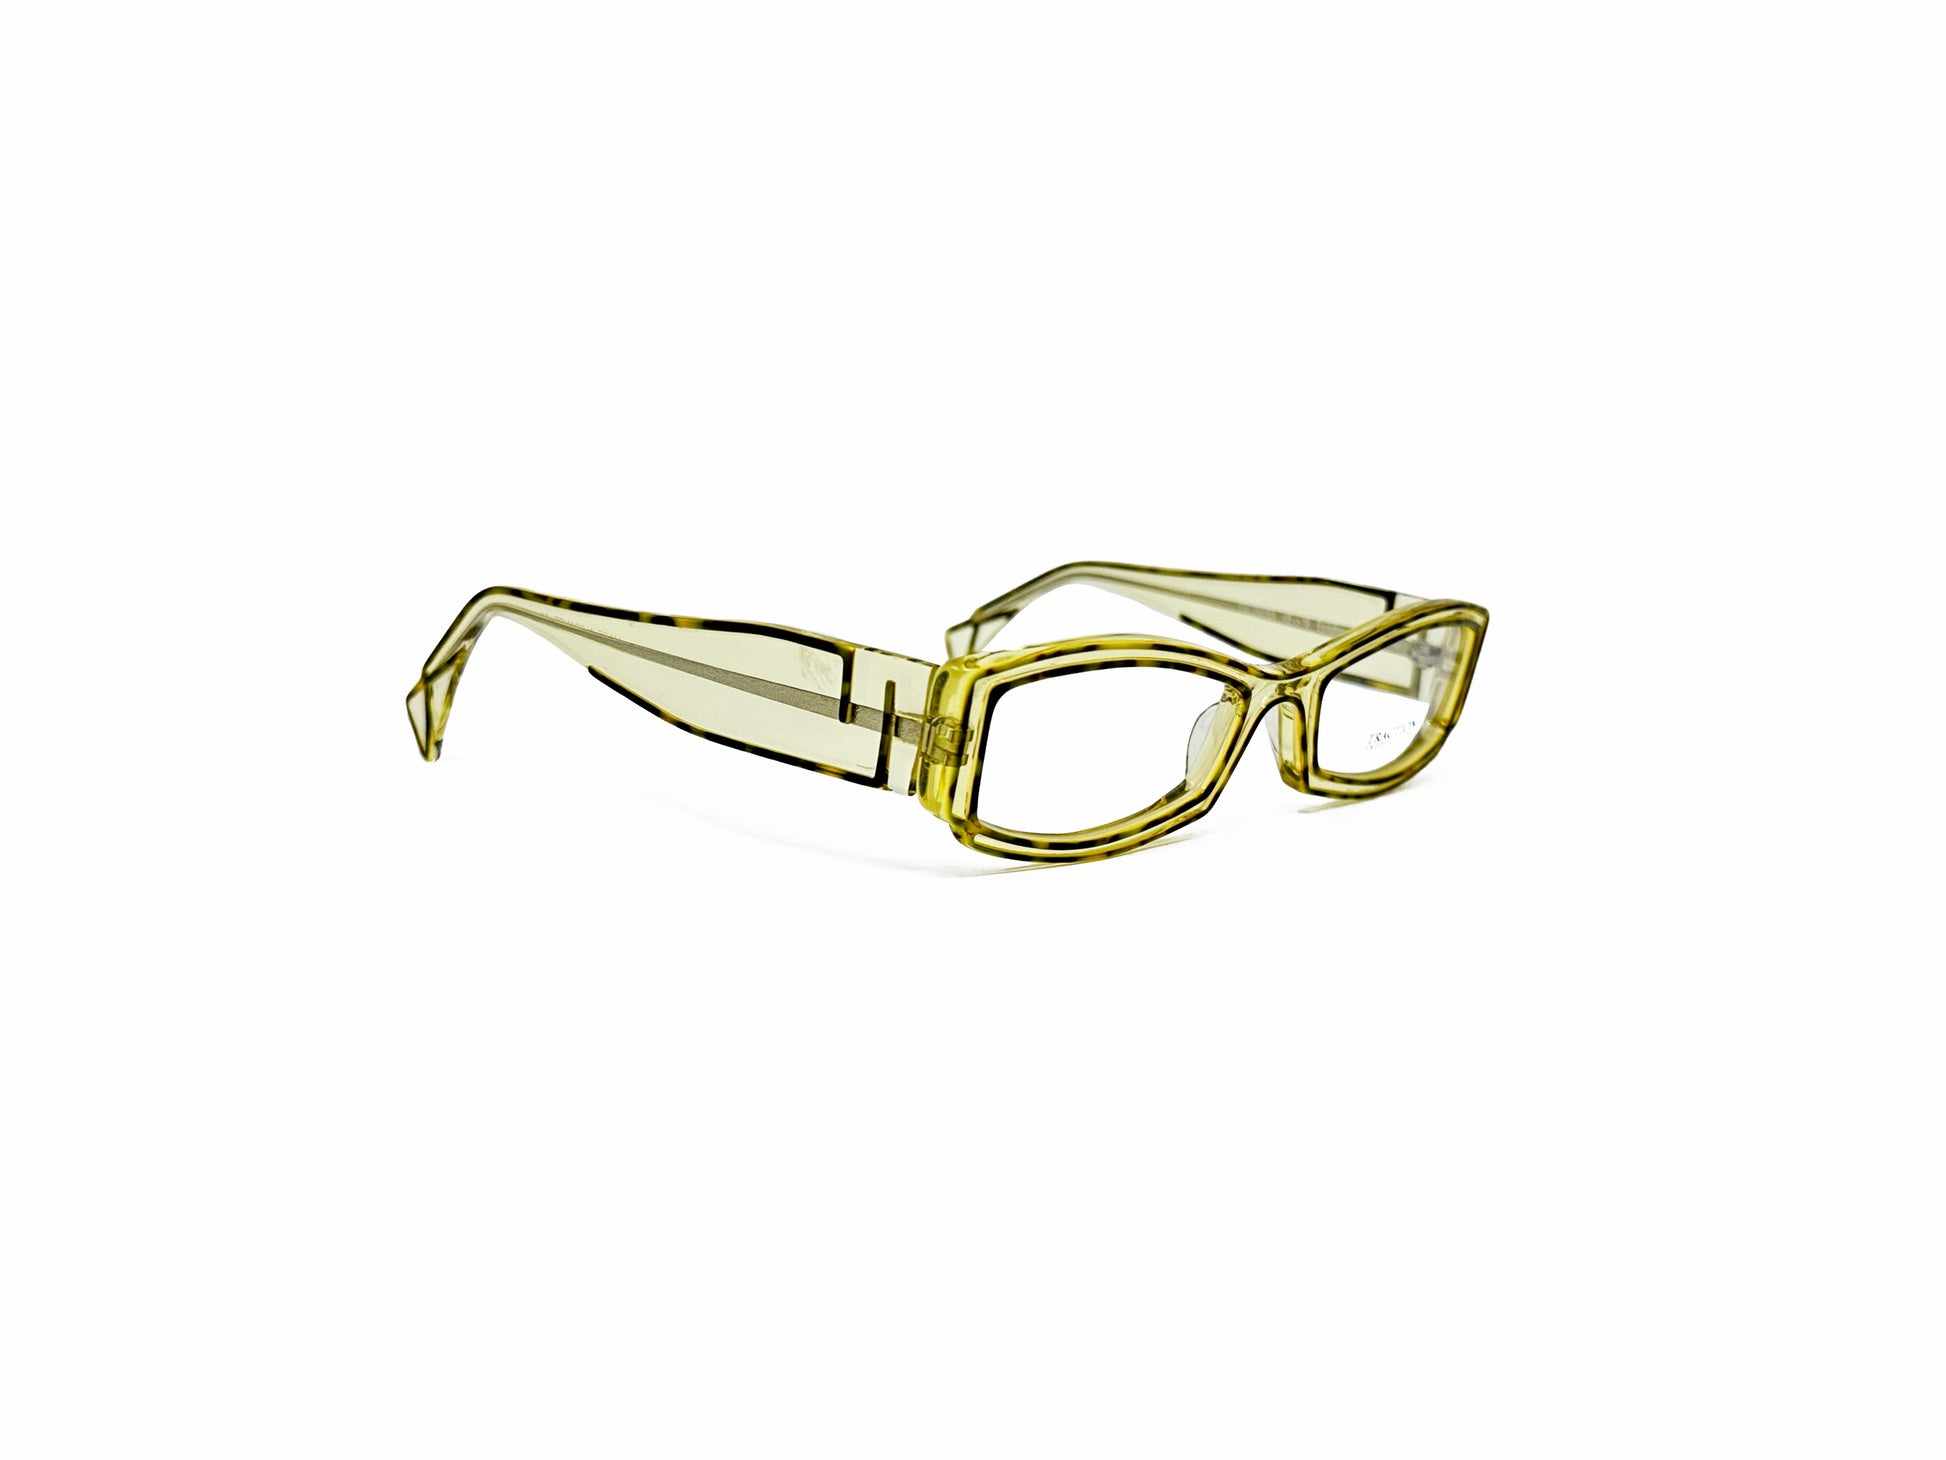 Traction curved, rectangular, acetate optical frame. Model: Palomina. Color: EC/Citron - Transparent yellow. Side view.